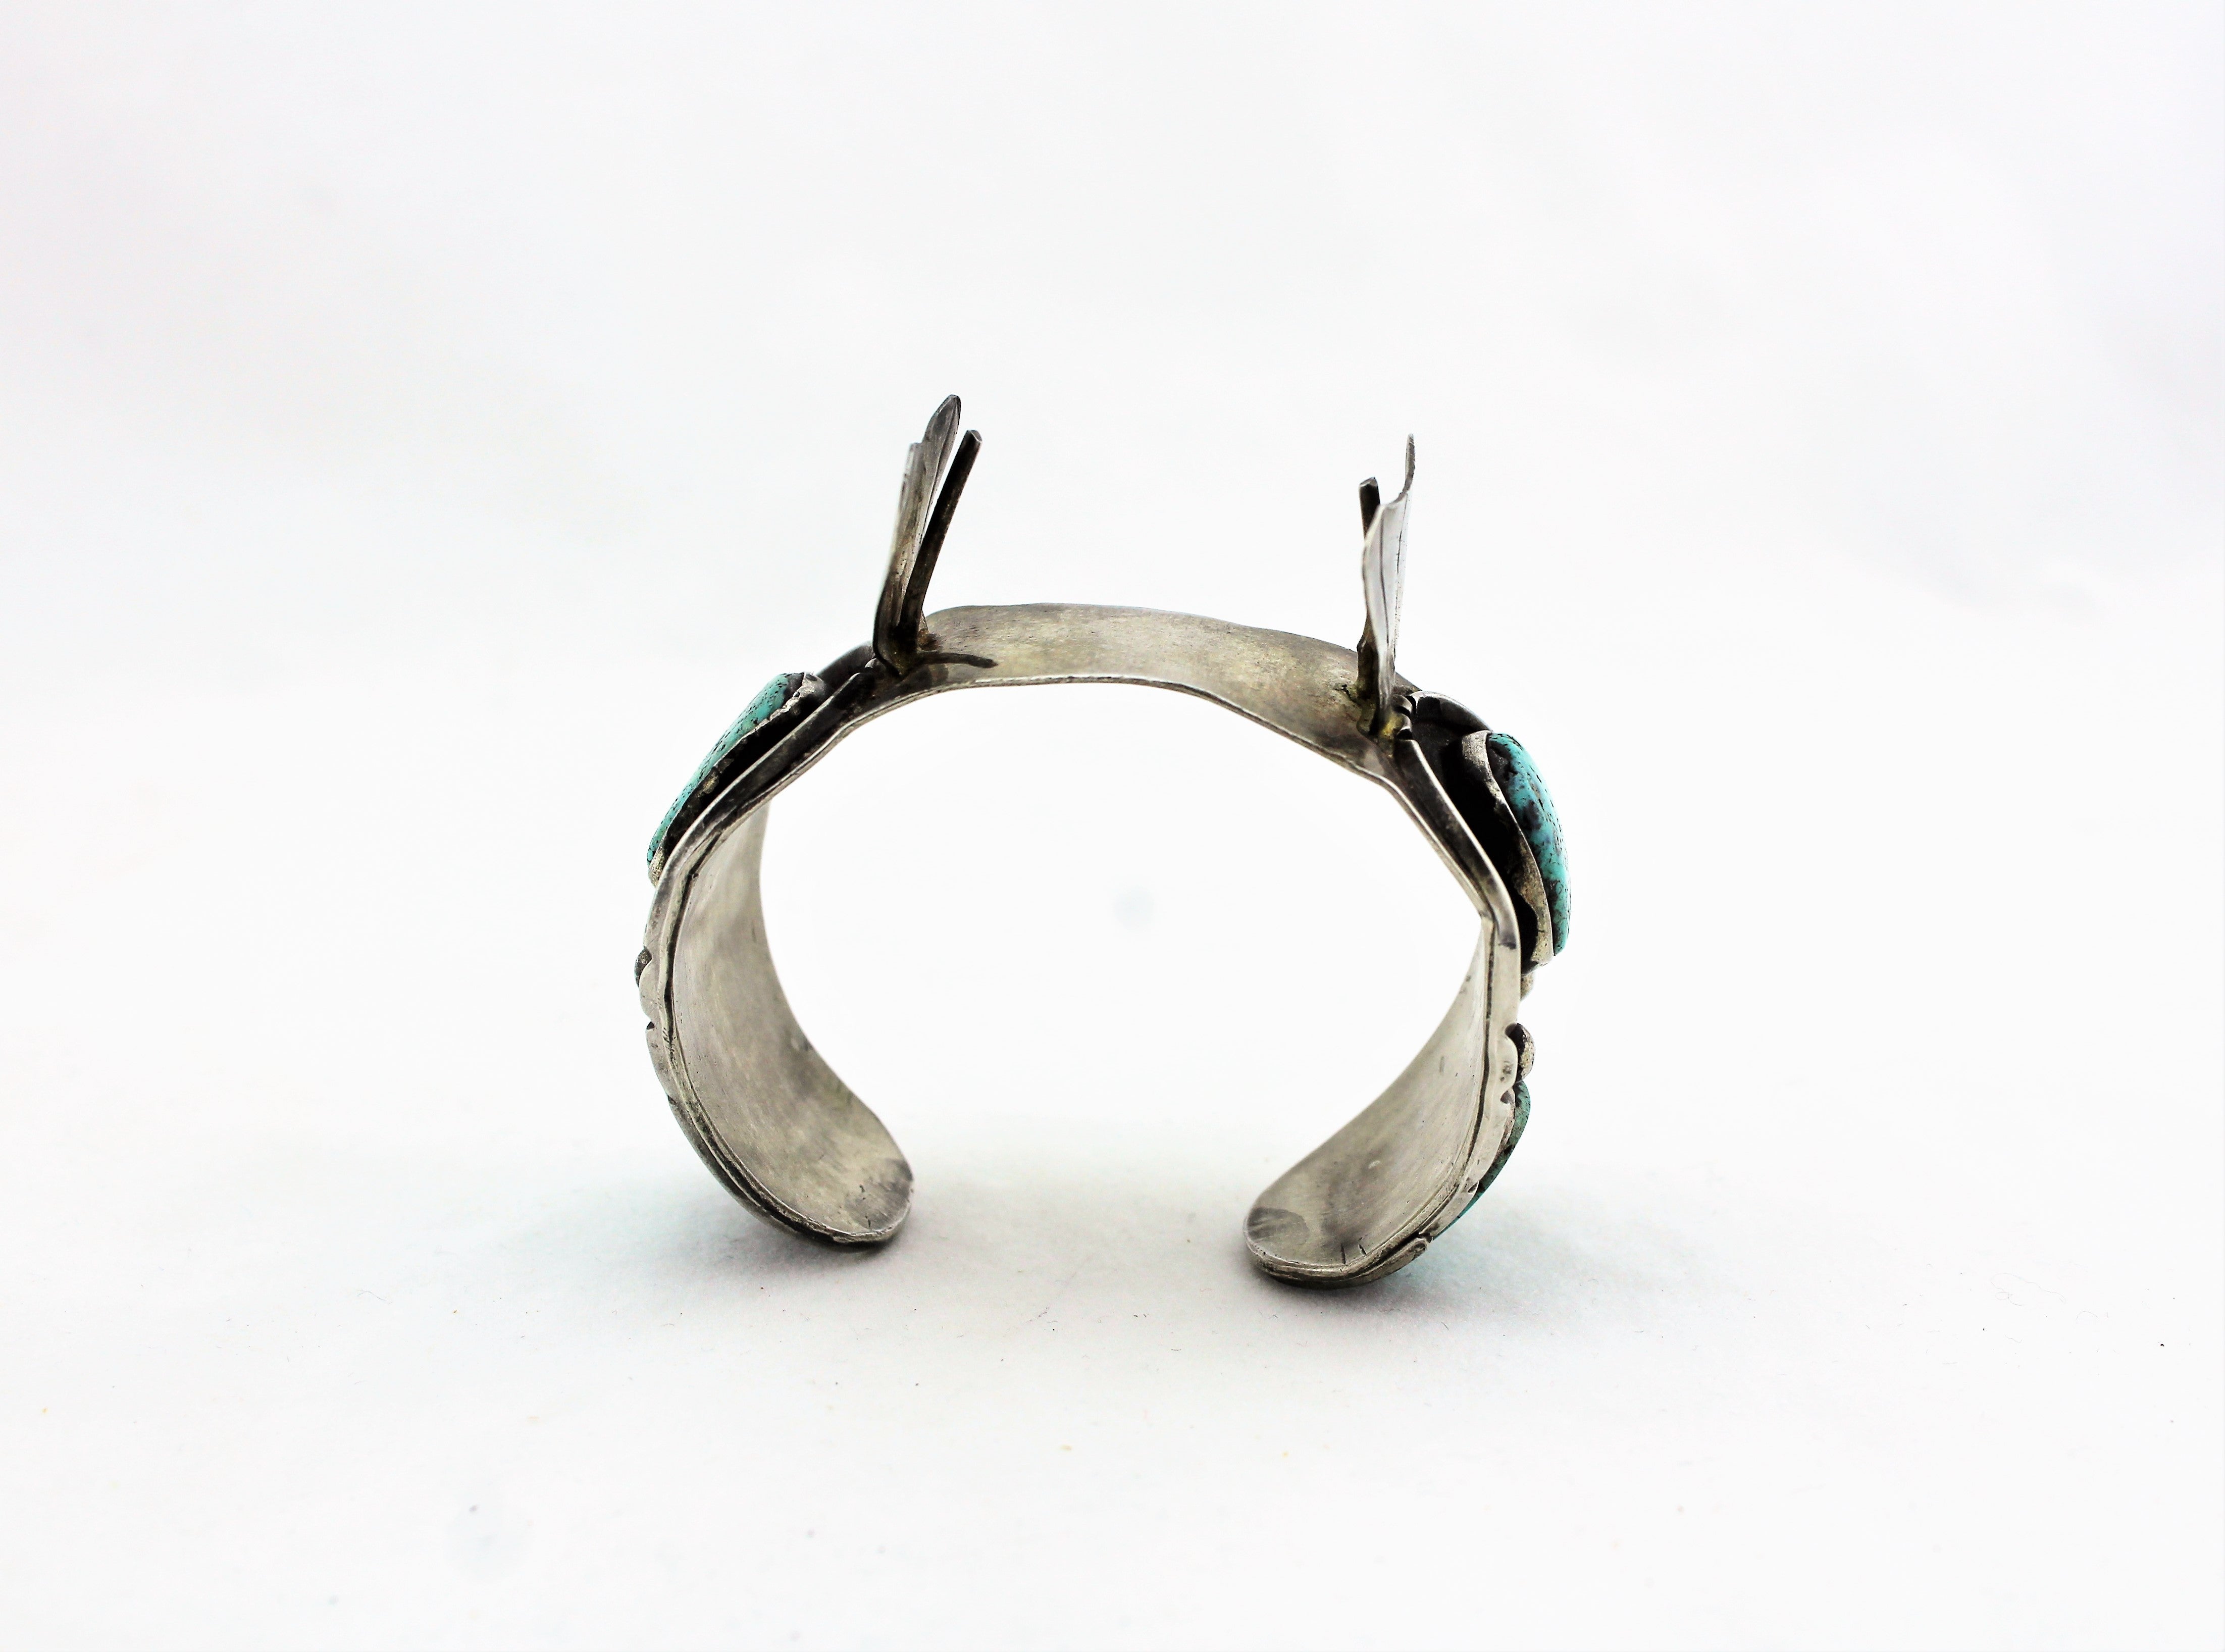 Antique Silver and Turquoise Watch Cuff